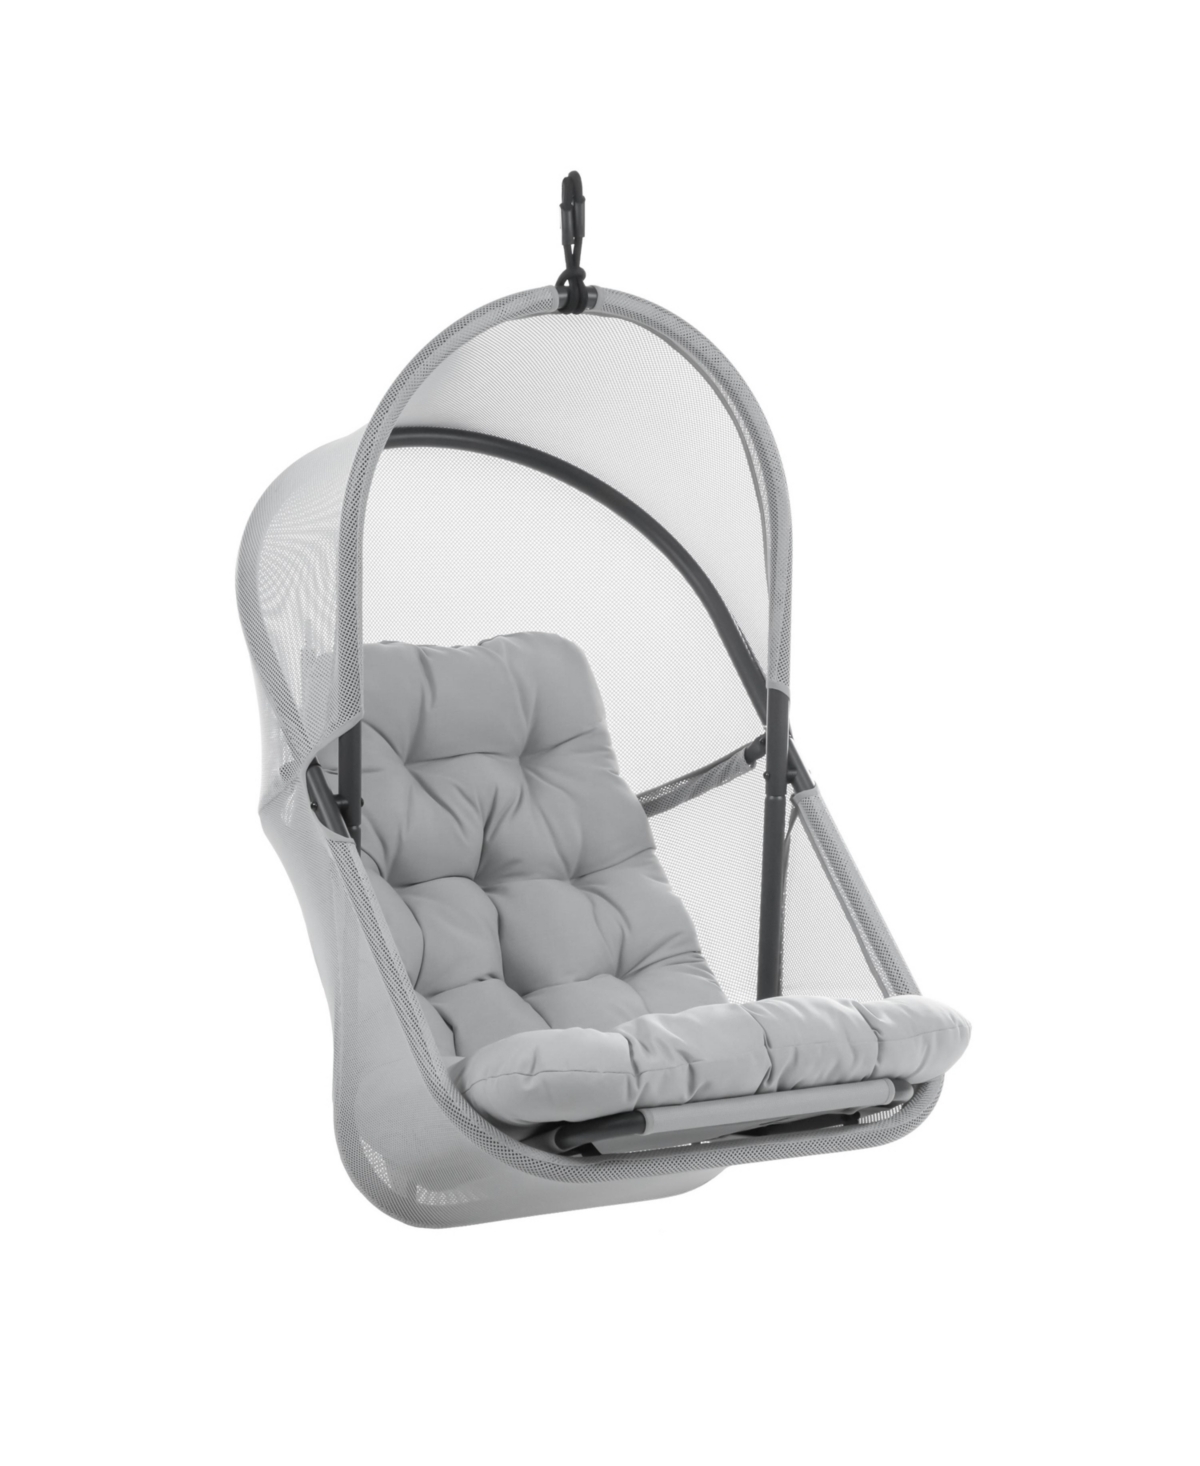 Furniture Of America 46" Mesh Foldable Swing Chair With Canopy High Back Cushion No Stand In Light Gray